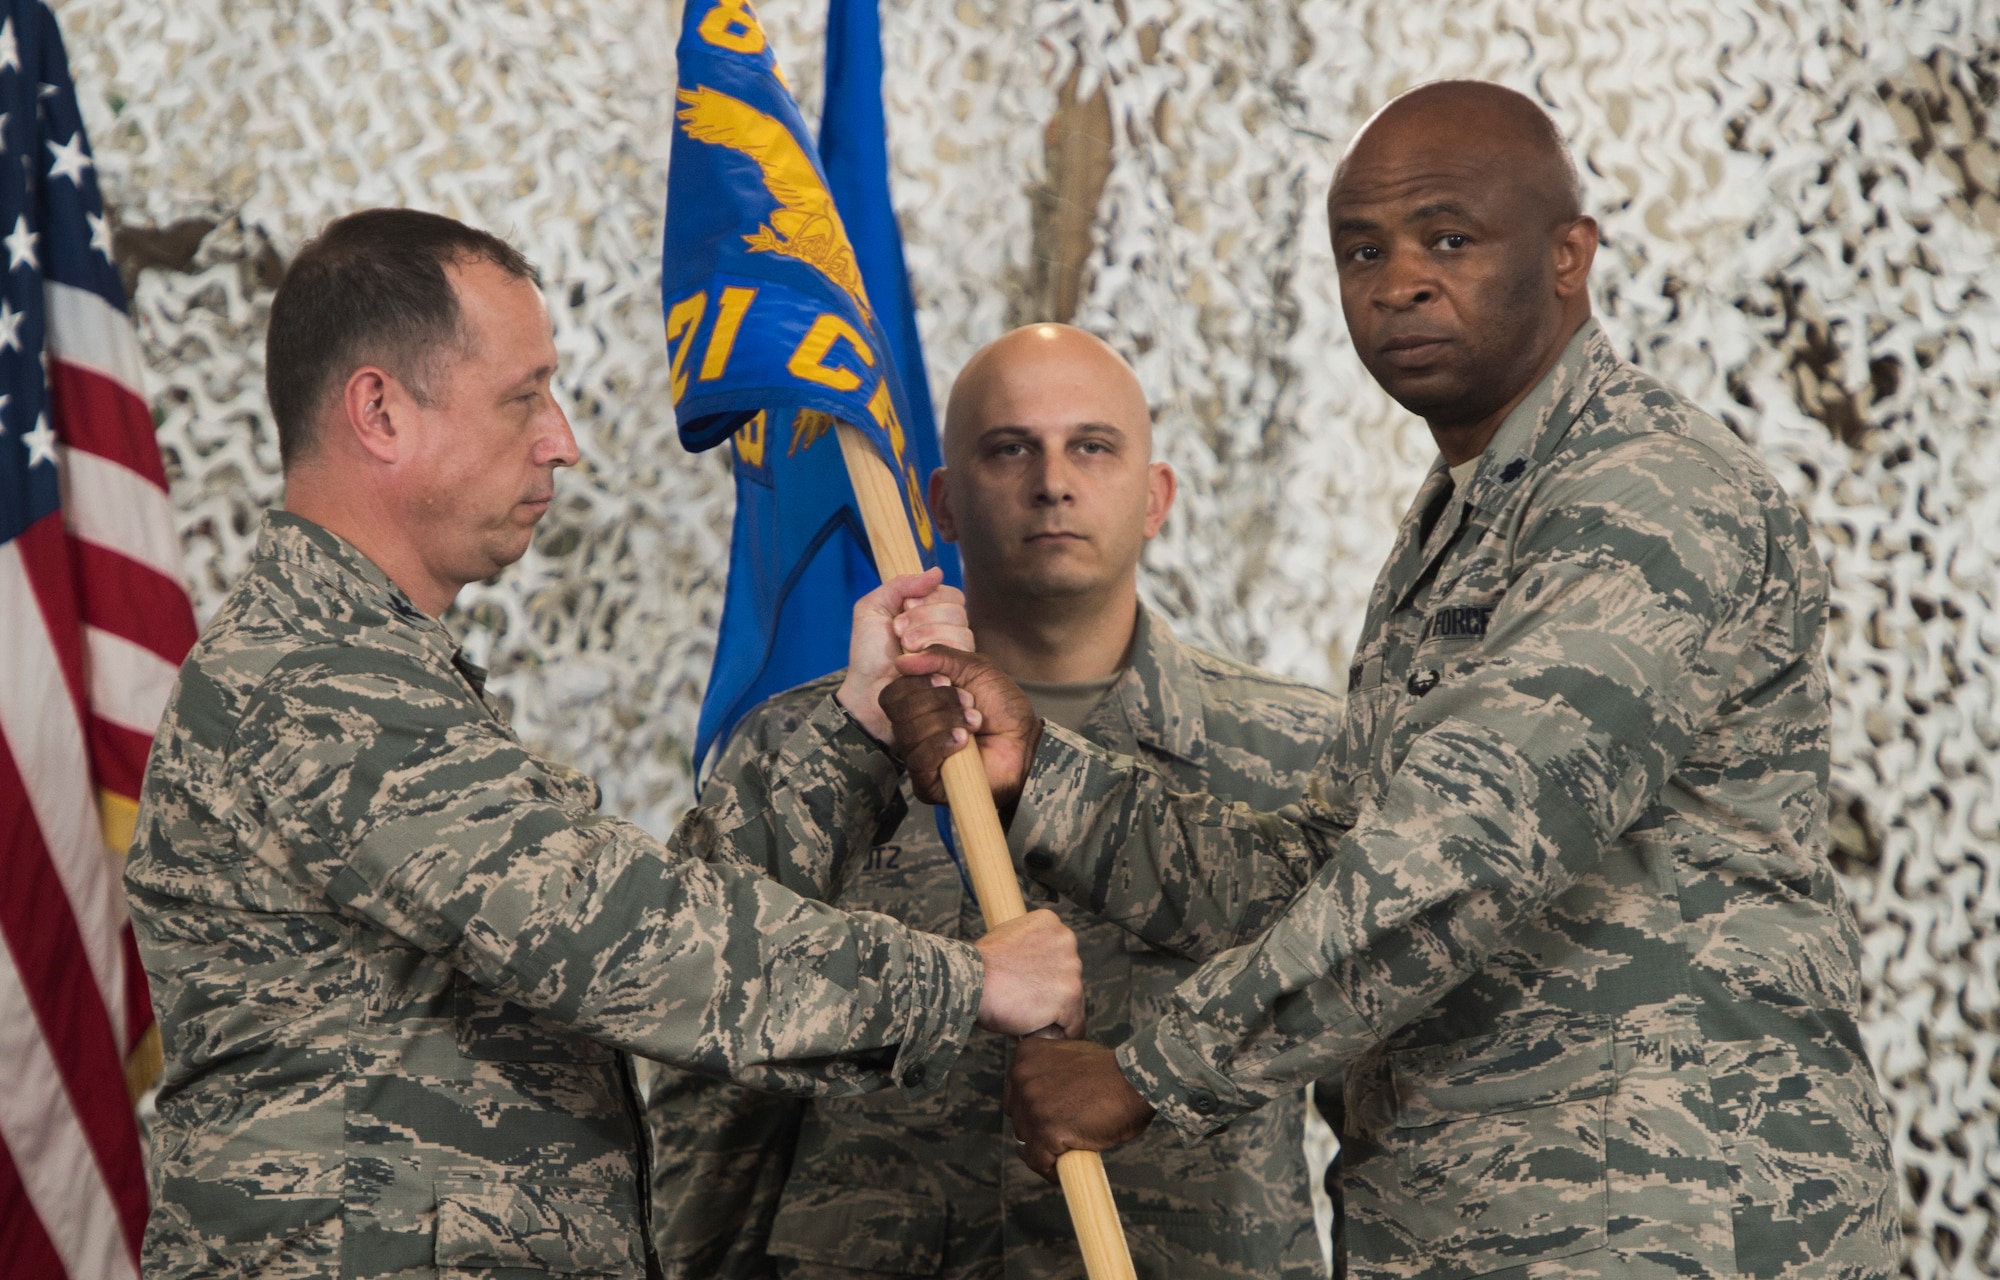 Col. Michael Frymire, 817th Contingency Response Group commander, ceremoniously hands the unit guidon of the 621st Contingency Response Squadron, the first activated unit in the 621st Contingency Response Wing reorganization, to Lt. Col. Donovan Davis, the first Commander of the 621 CRS at Joint Base McGuire-Dix-Lakehurst, N.J., May 28, 2015. The CRW will maintain the same mission to support air mobility operations worldwide. The wing is tasked with rapidly deploying its approximately 1,500 Airmen to quickly open and operate airfields, establish, expand, sustain and coordinate air mobility operations and liaise with partner nations to foster the development of their air mobility systems through education and outreach. (U.S. Air Force photo/Staff Sgt. Gustavo Gonzalez)